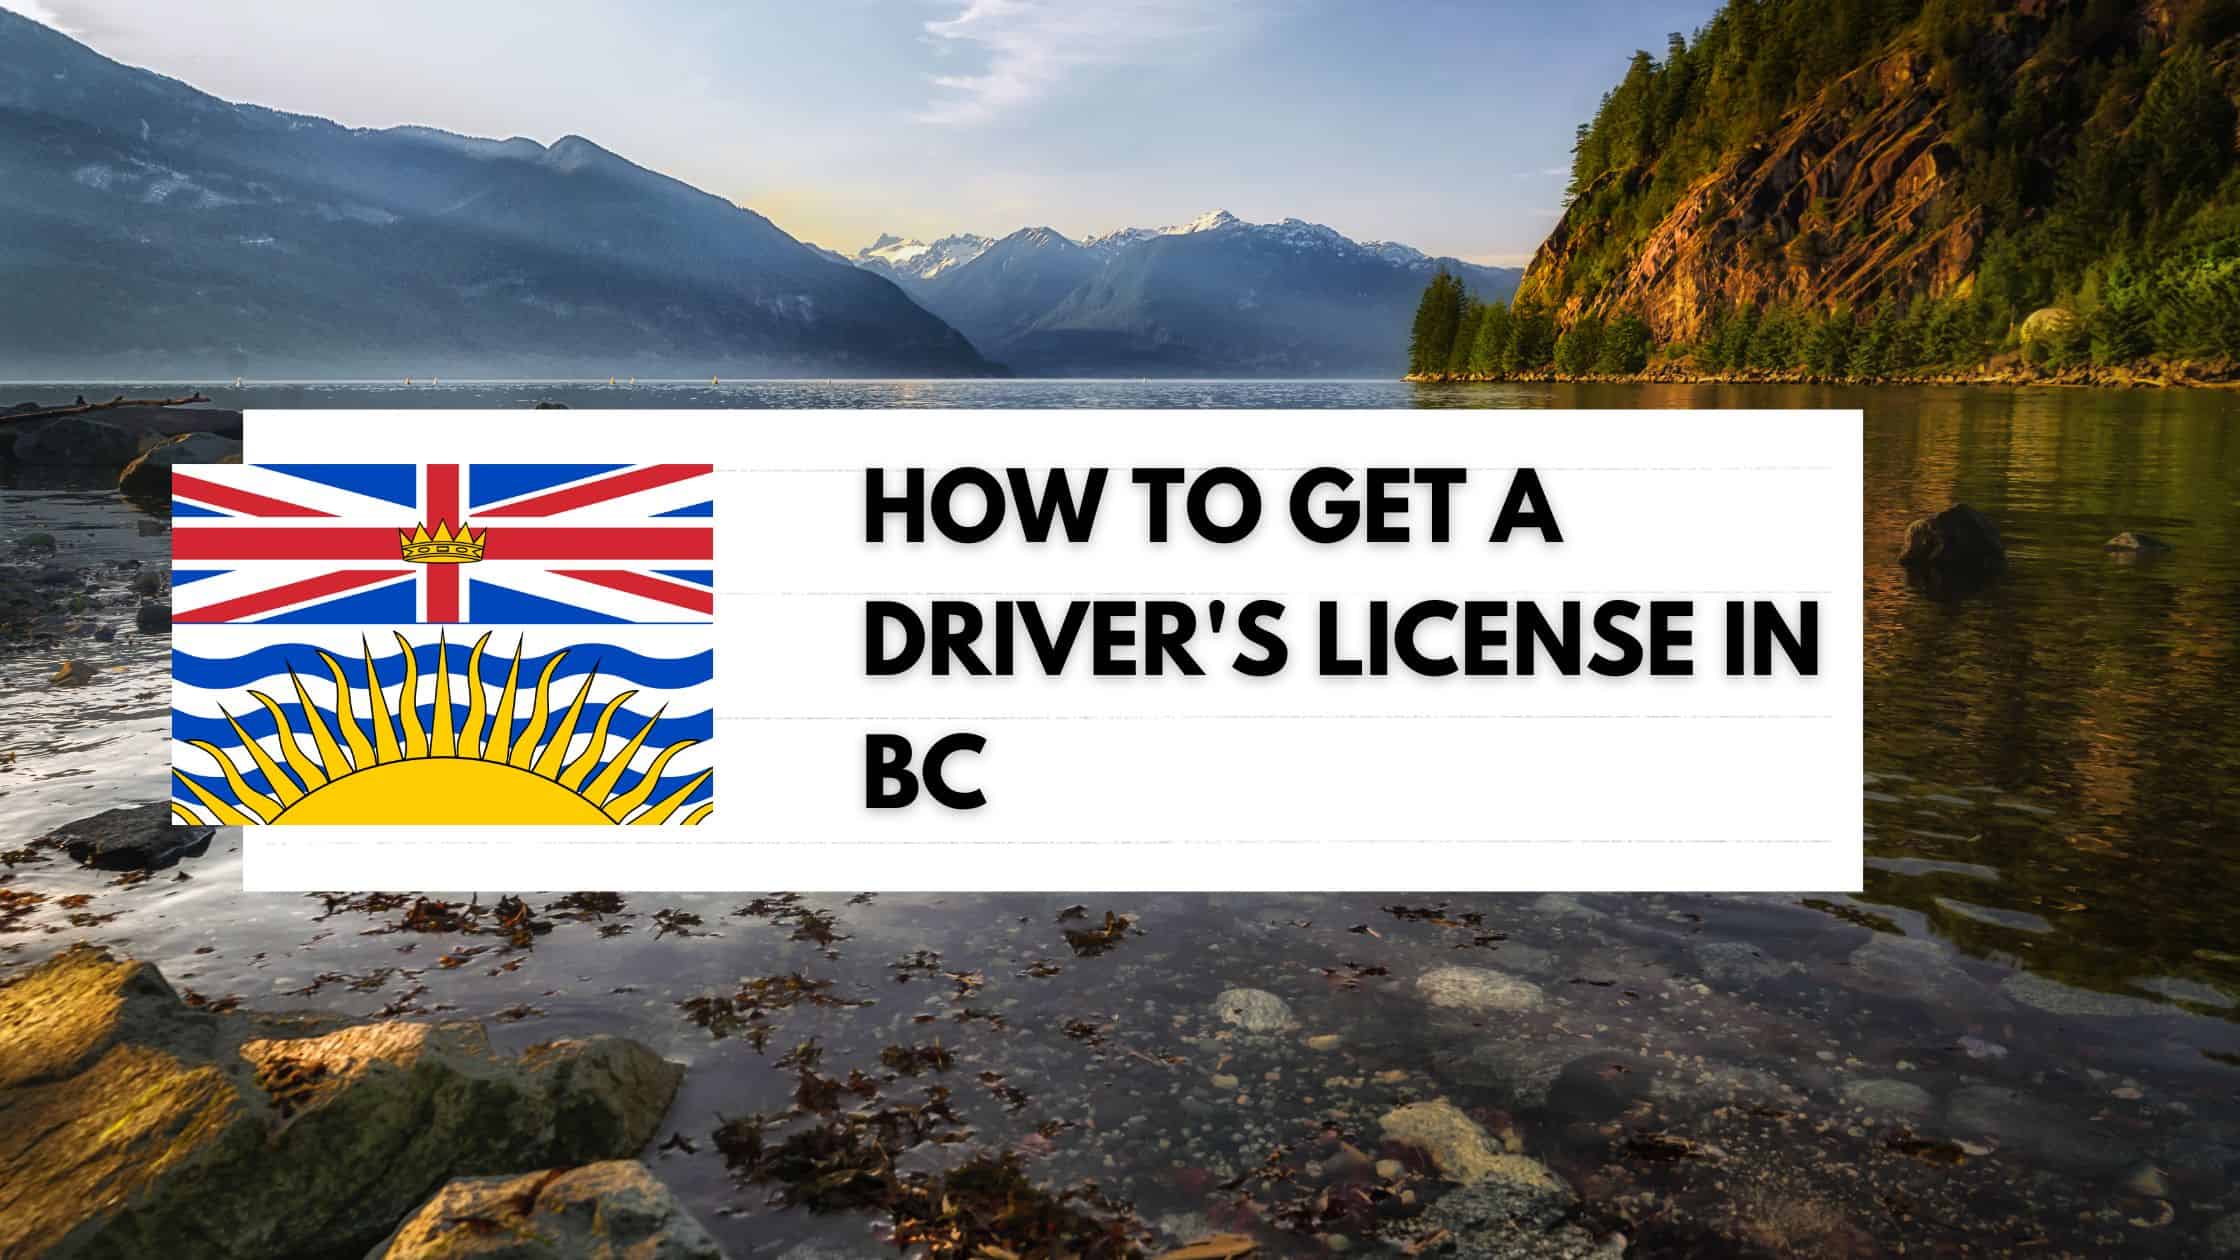 How to get a driver's license in BC